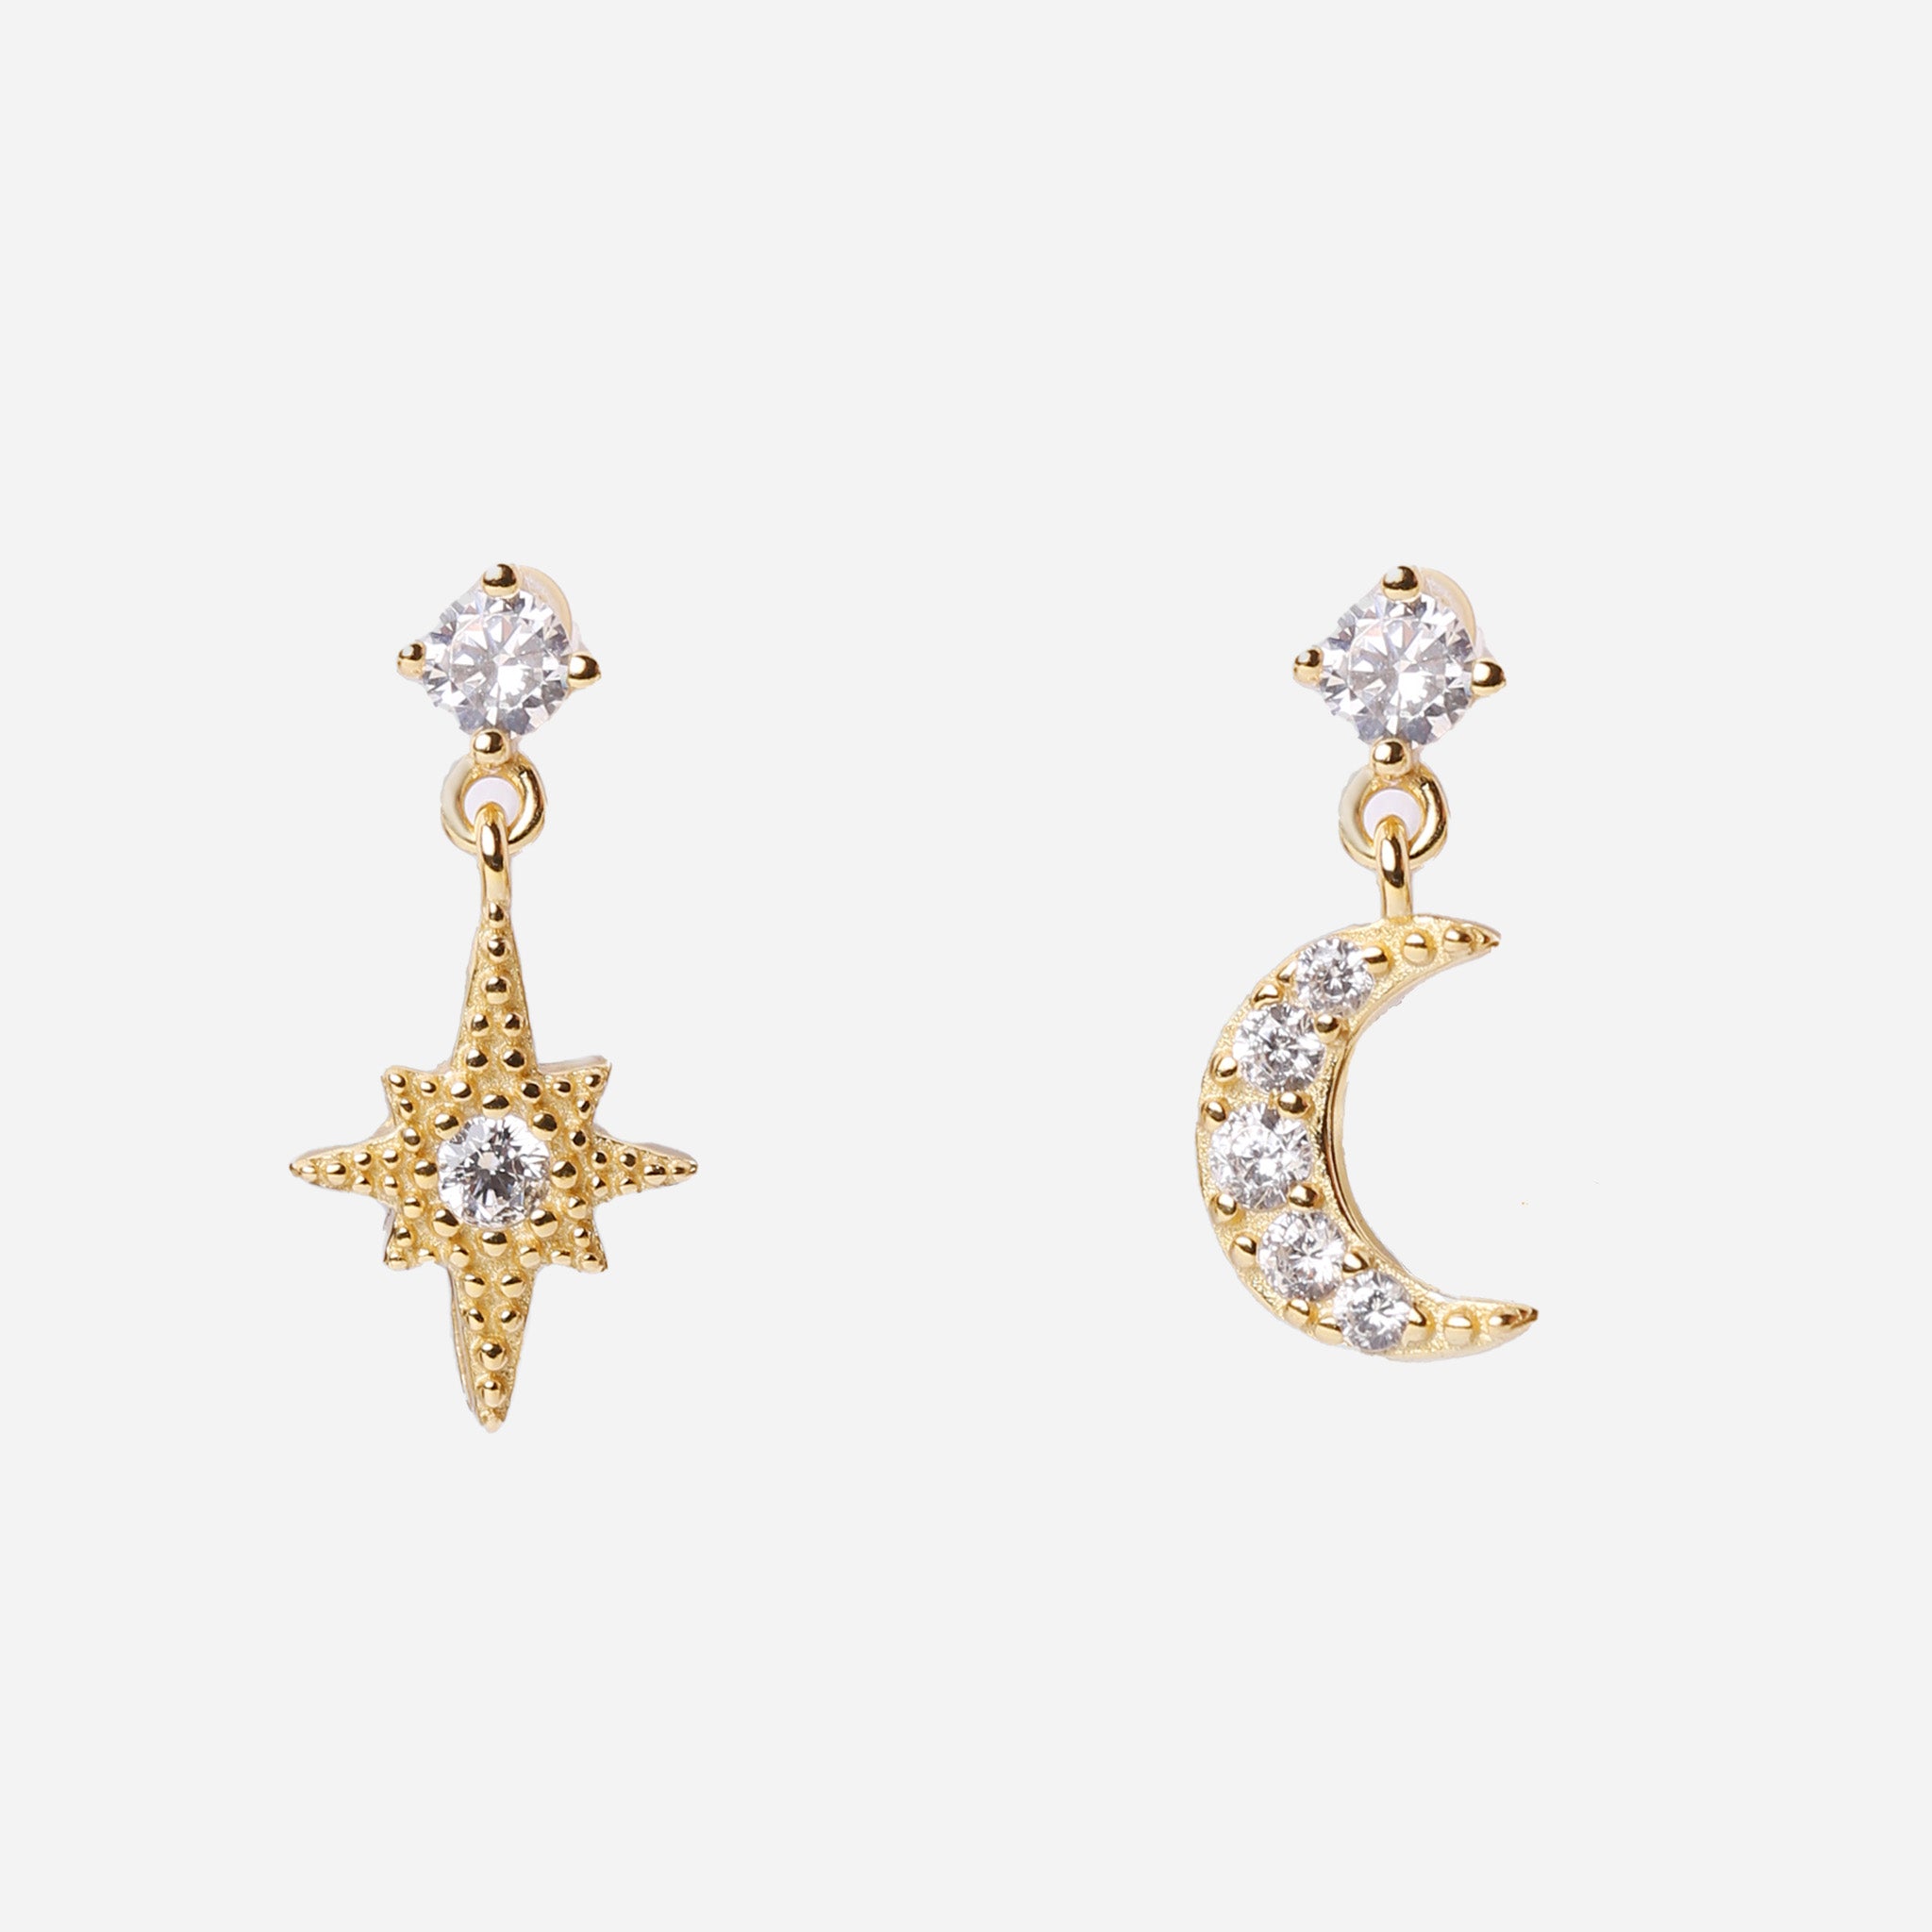 SOMIY Jewelry- Elevate Your Style with Our Elegant Clip-On Earrings